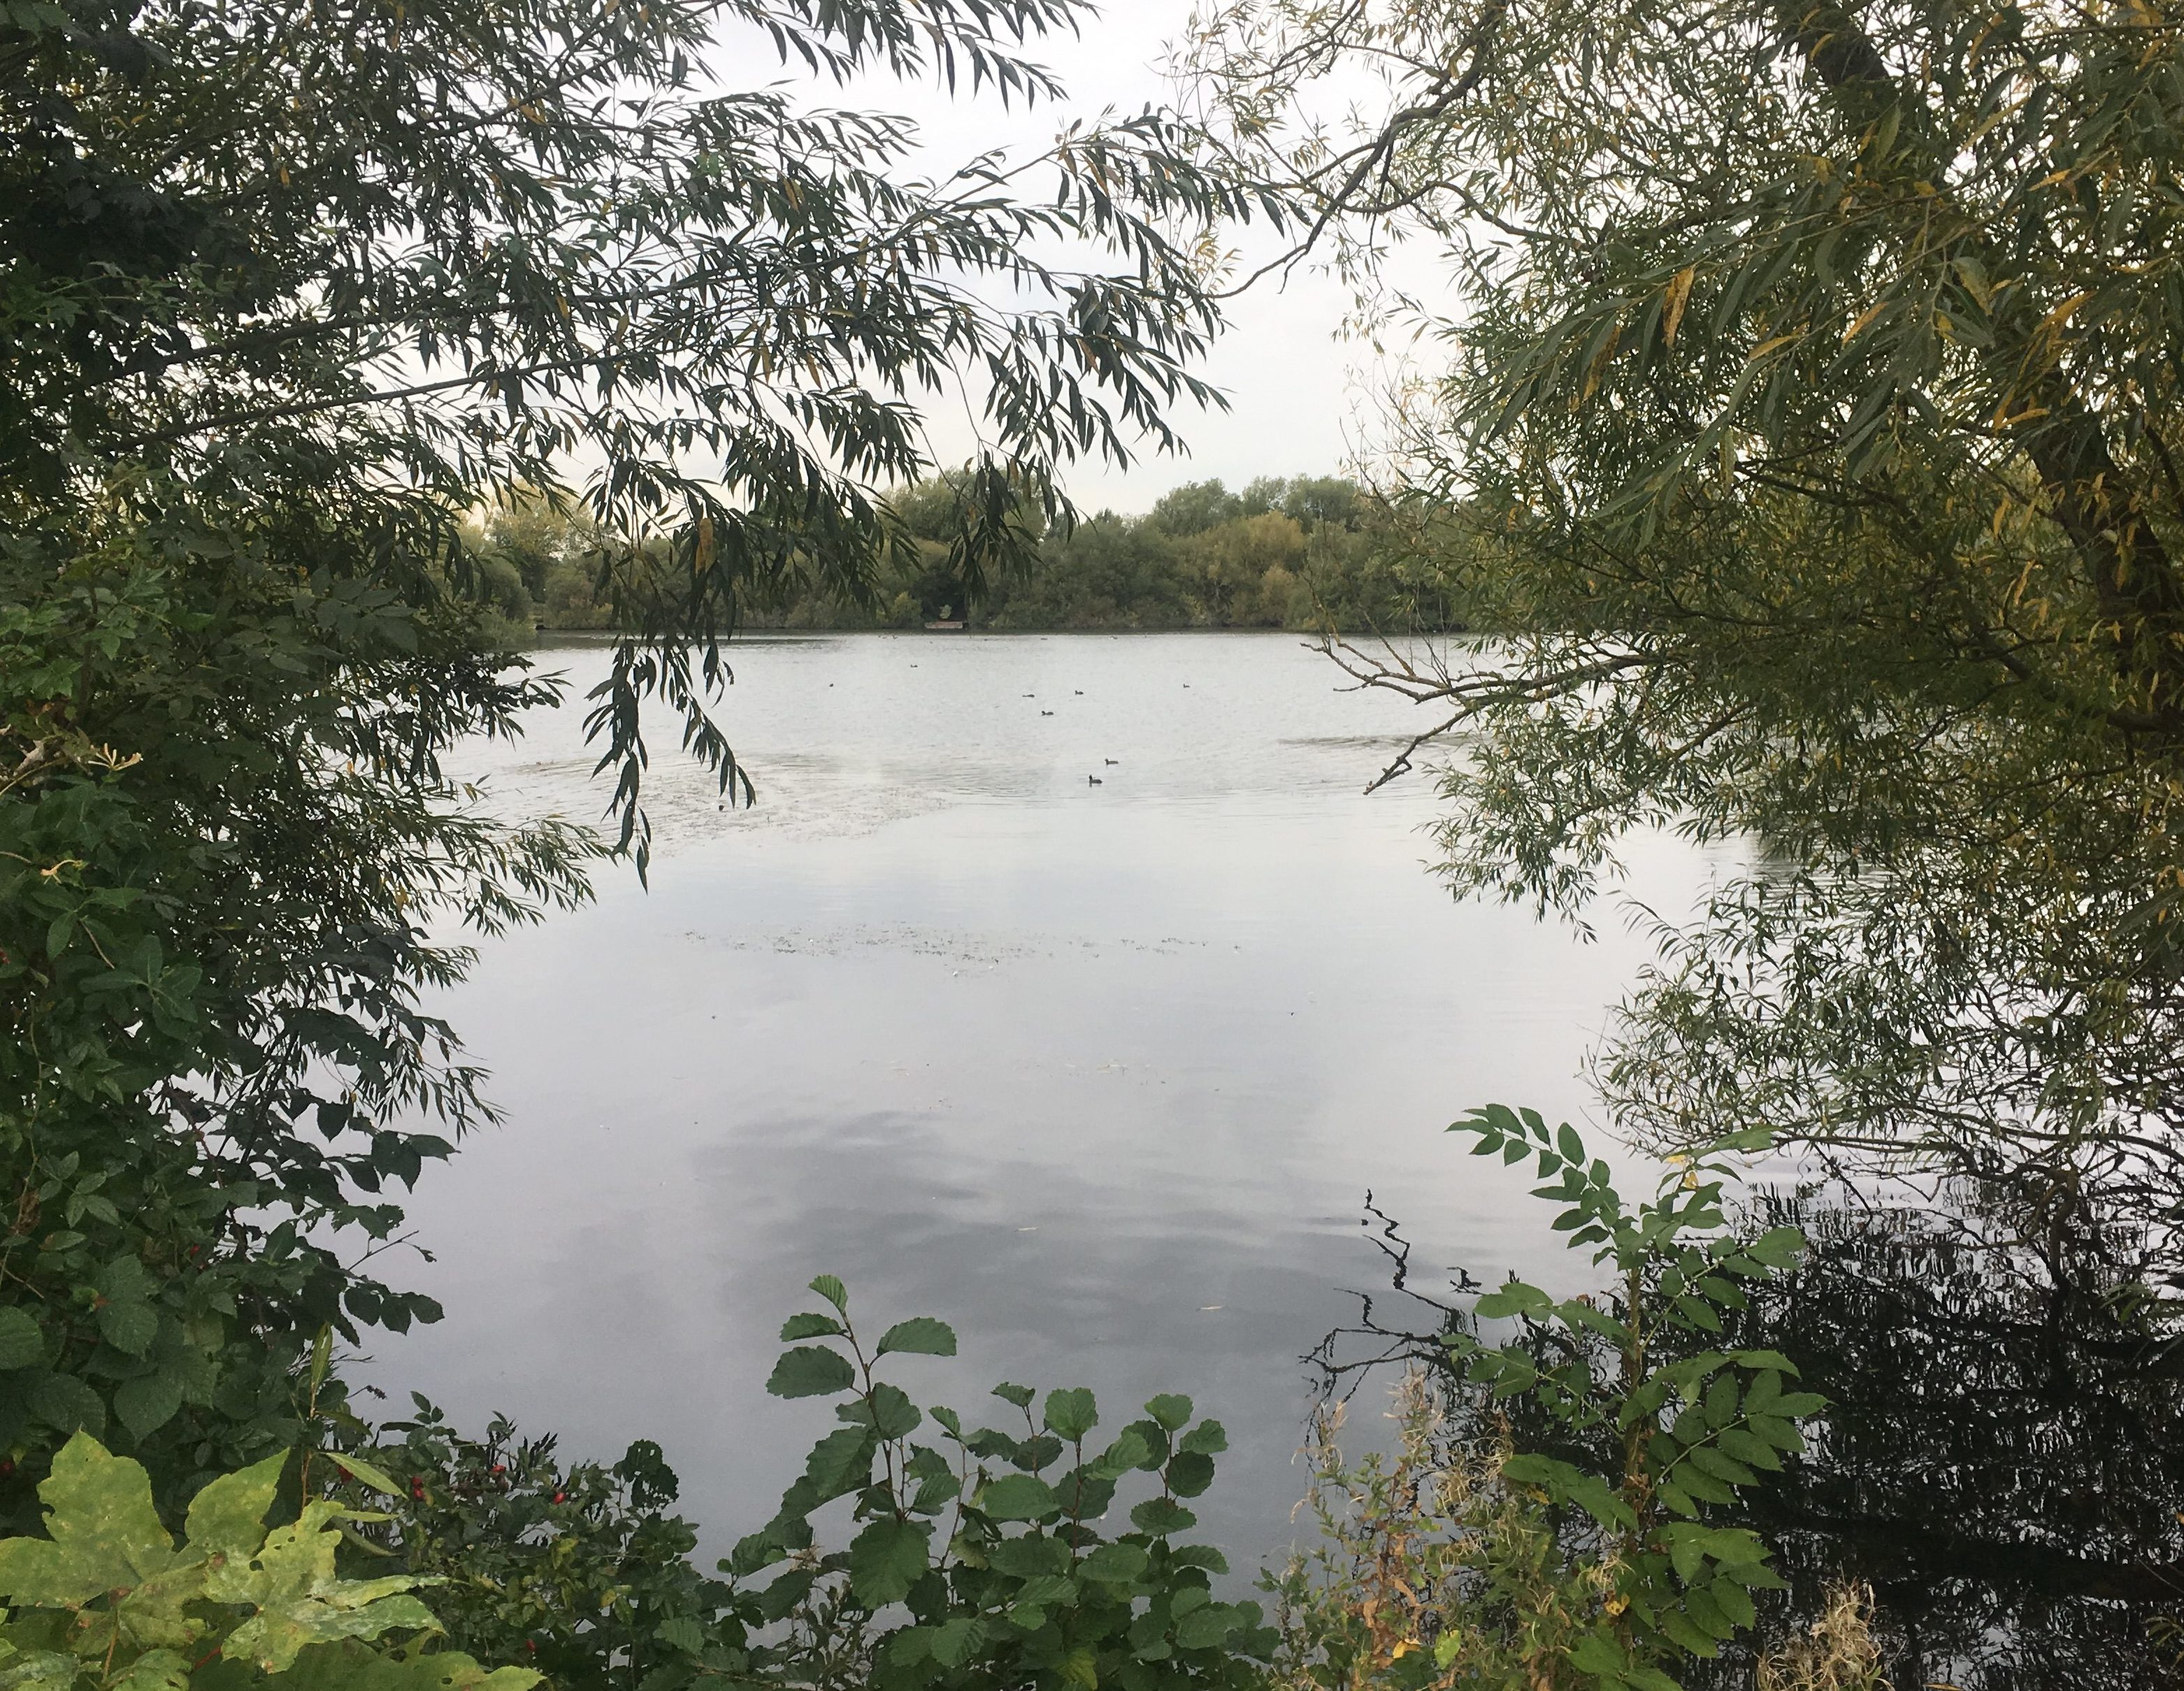 Cheshunt Lake in the Lee Valley